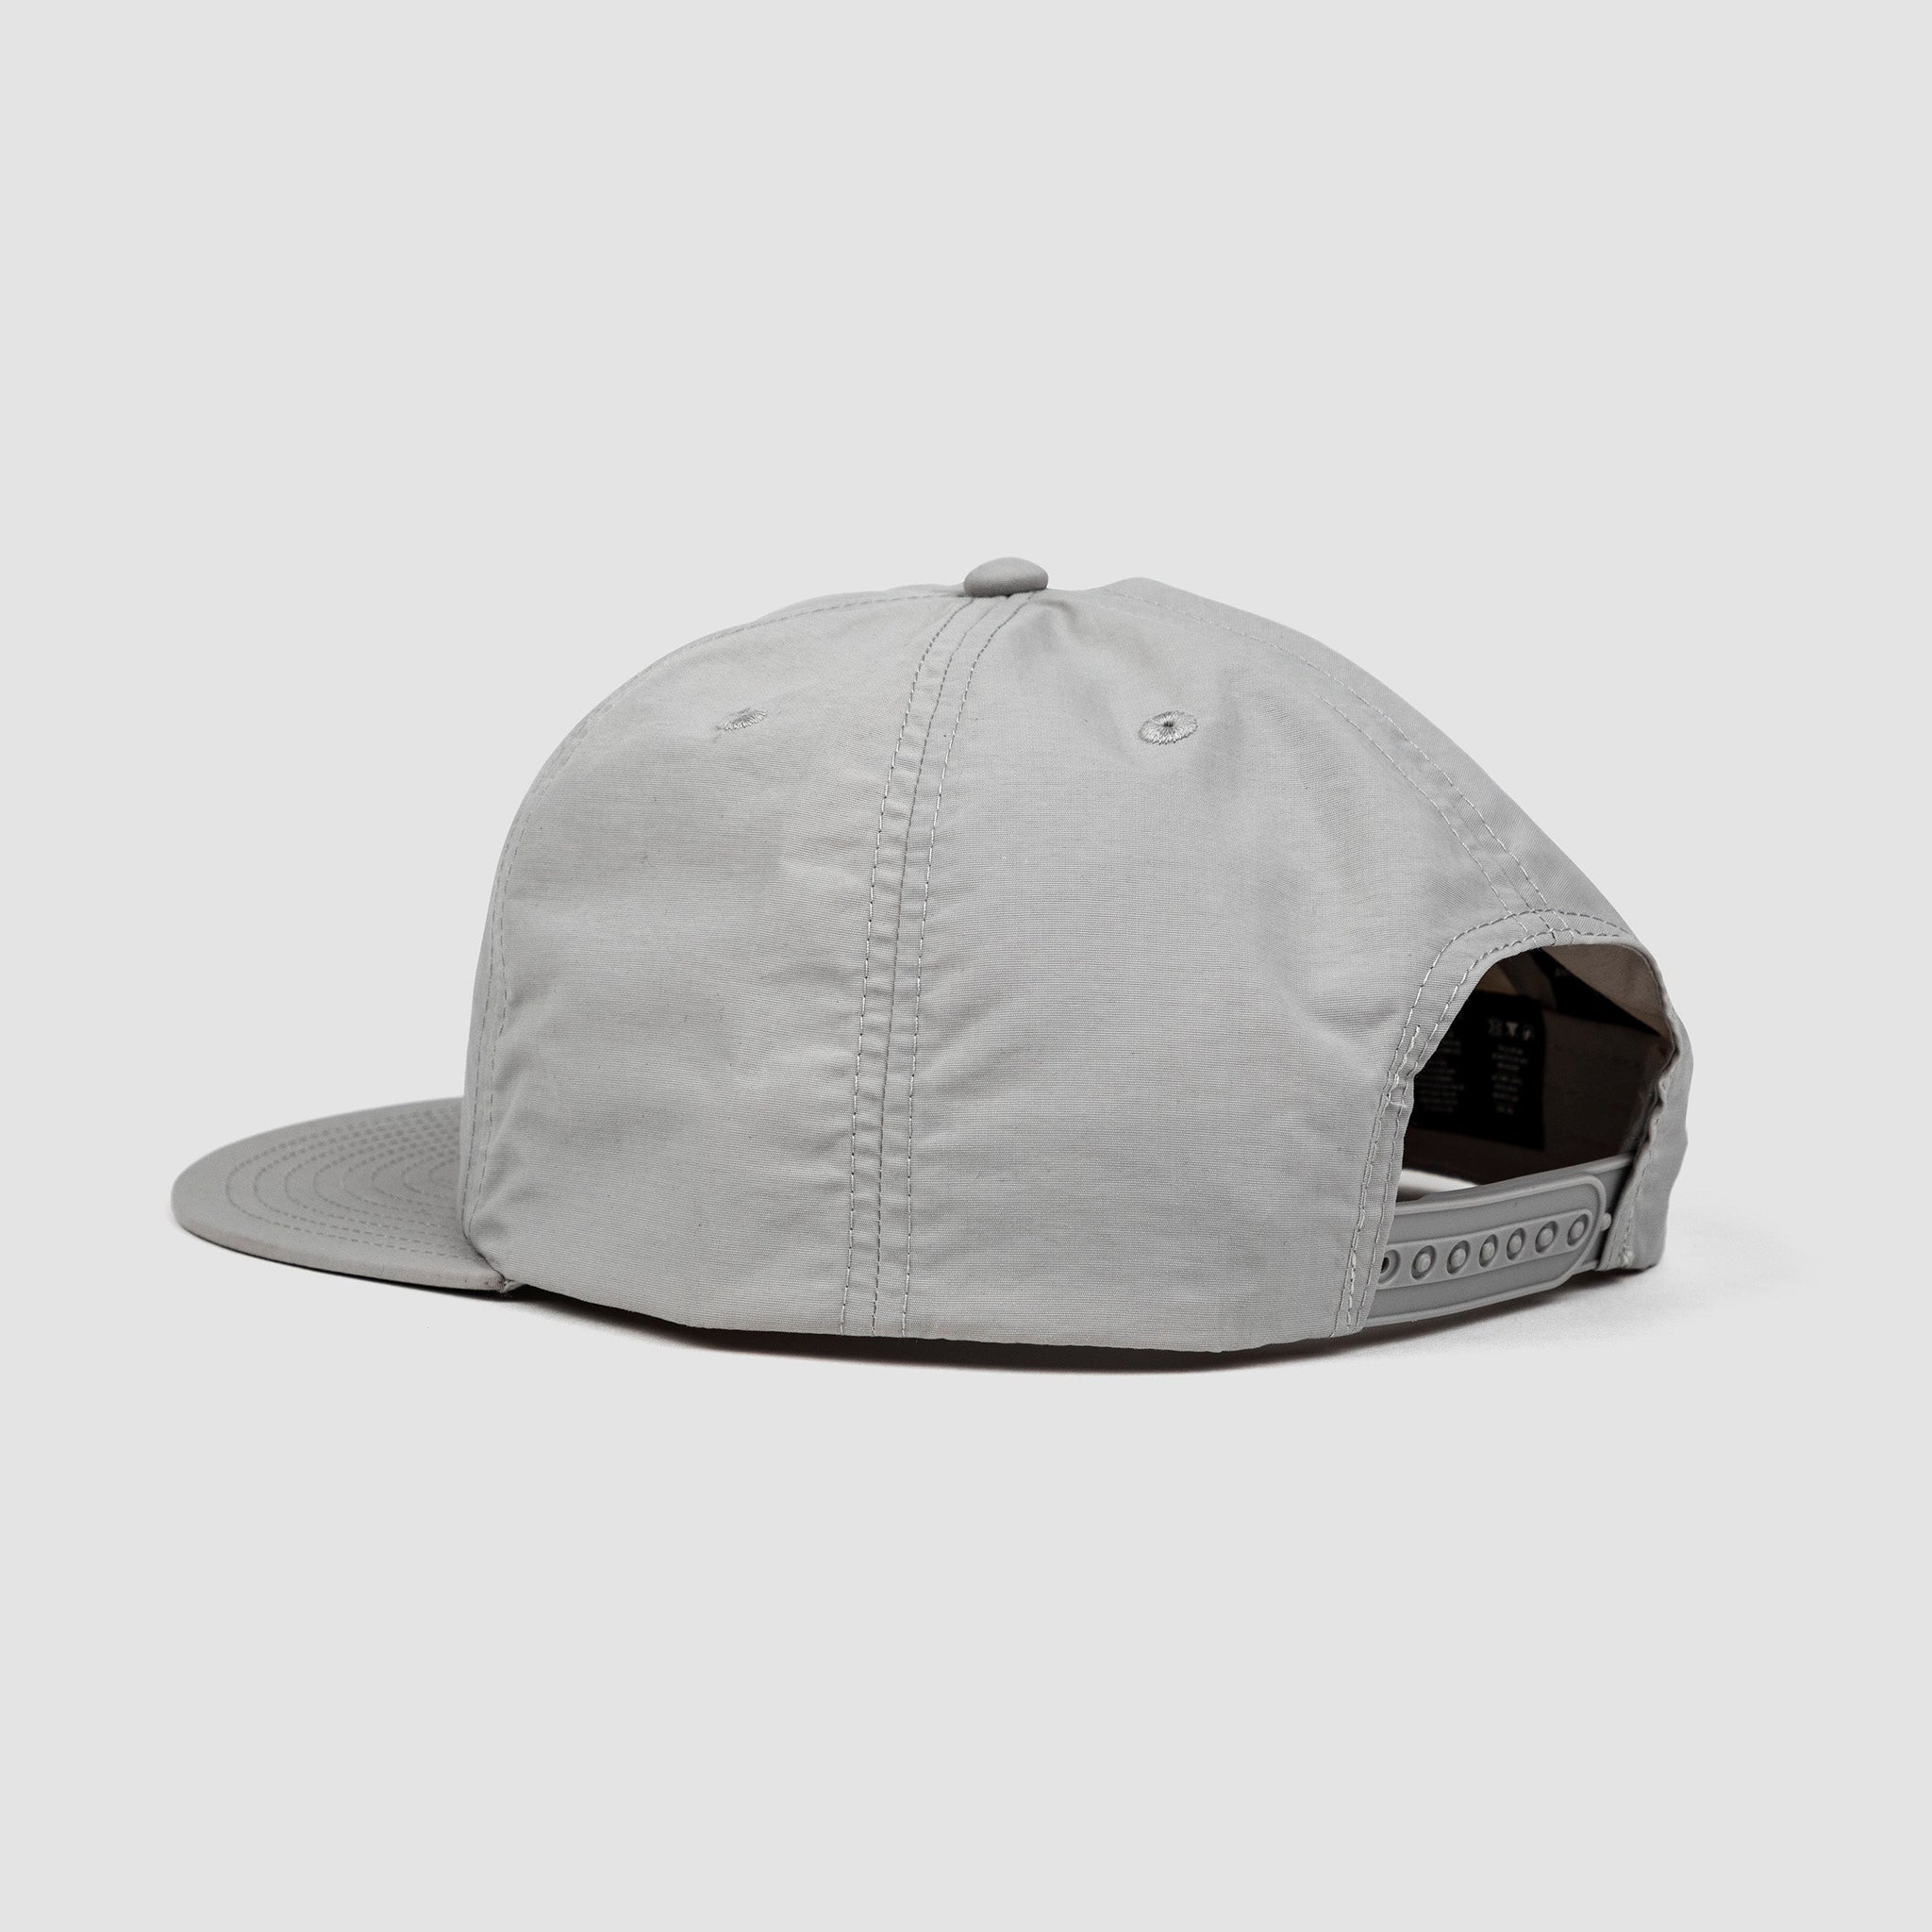 Back shot of gray unisex adult surf-style 5-panel hat with adjustable snap closure.